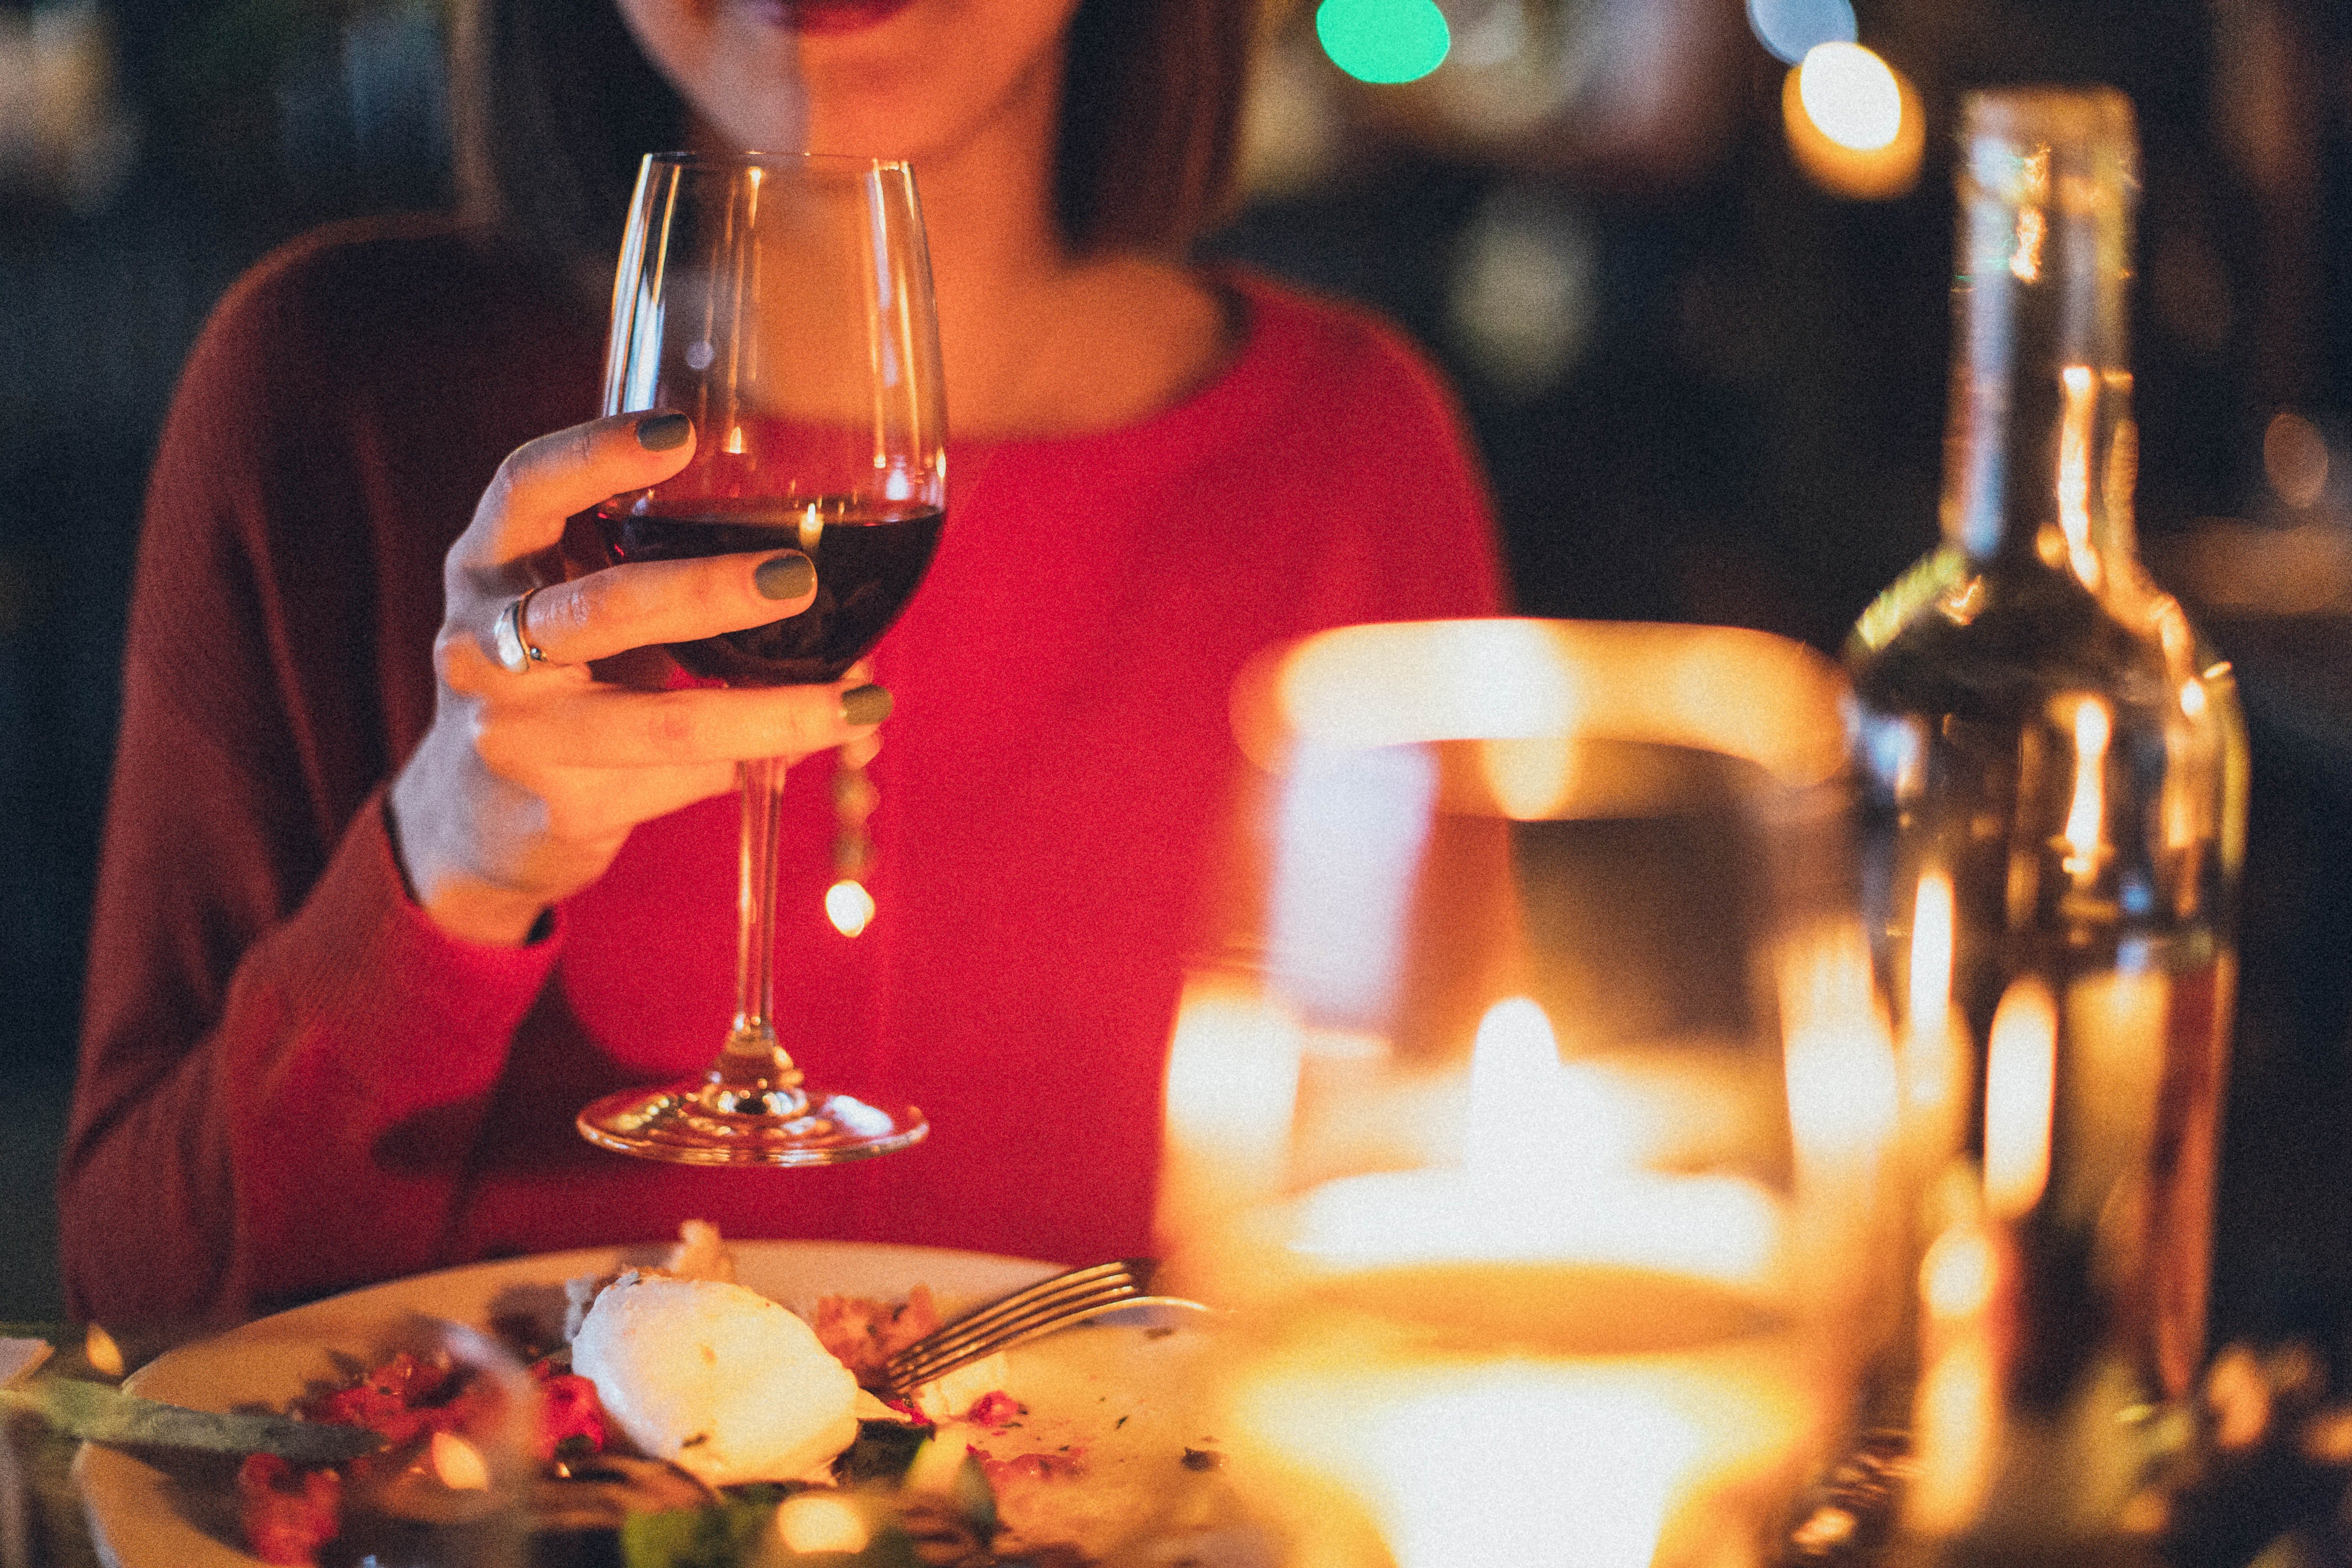 While waiting for her friends at the restaurant, the woman drank wine to while away time. | Photo: Pexels/Elina Sazonova